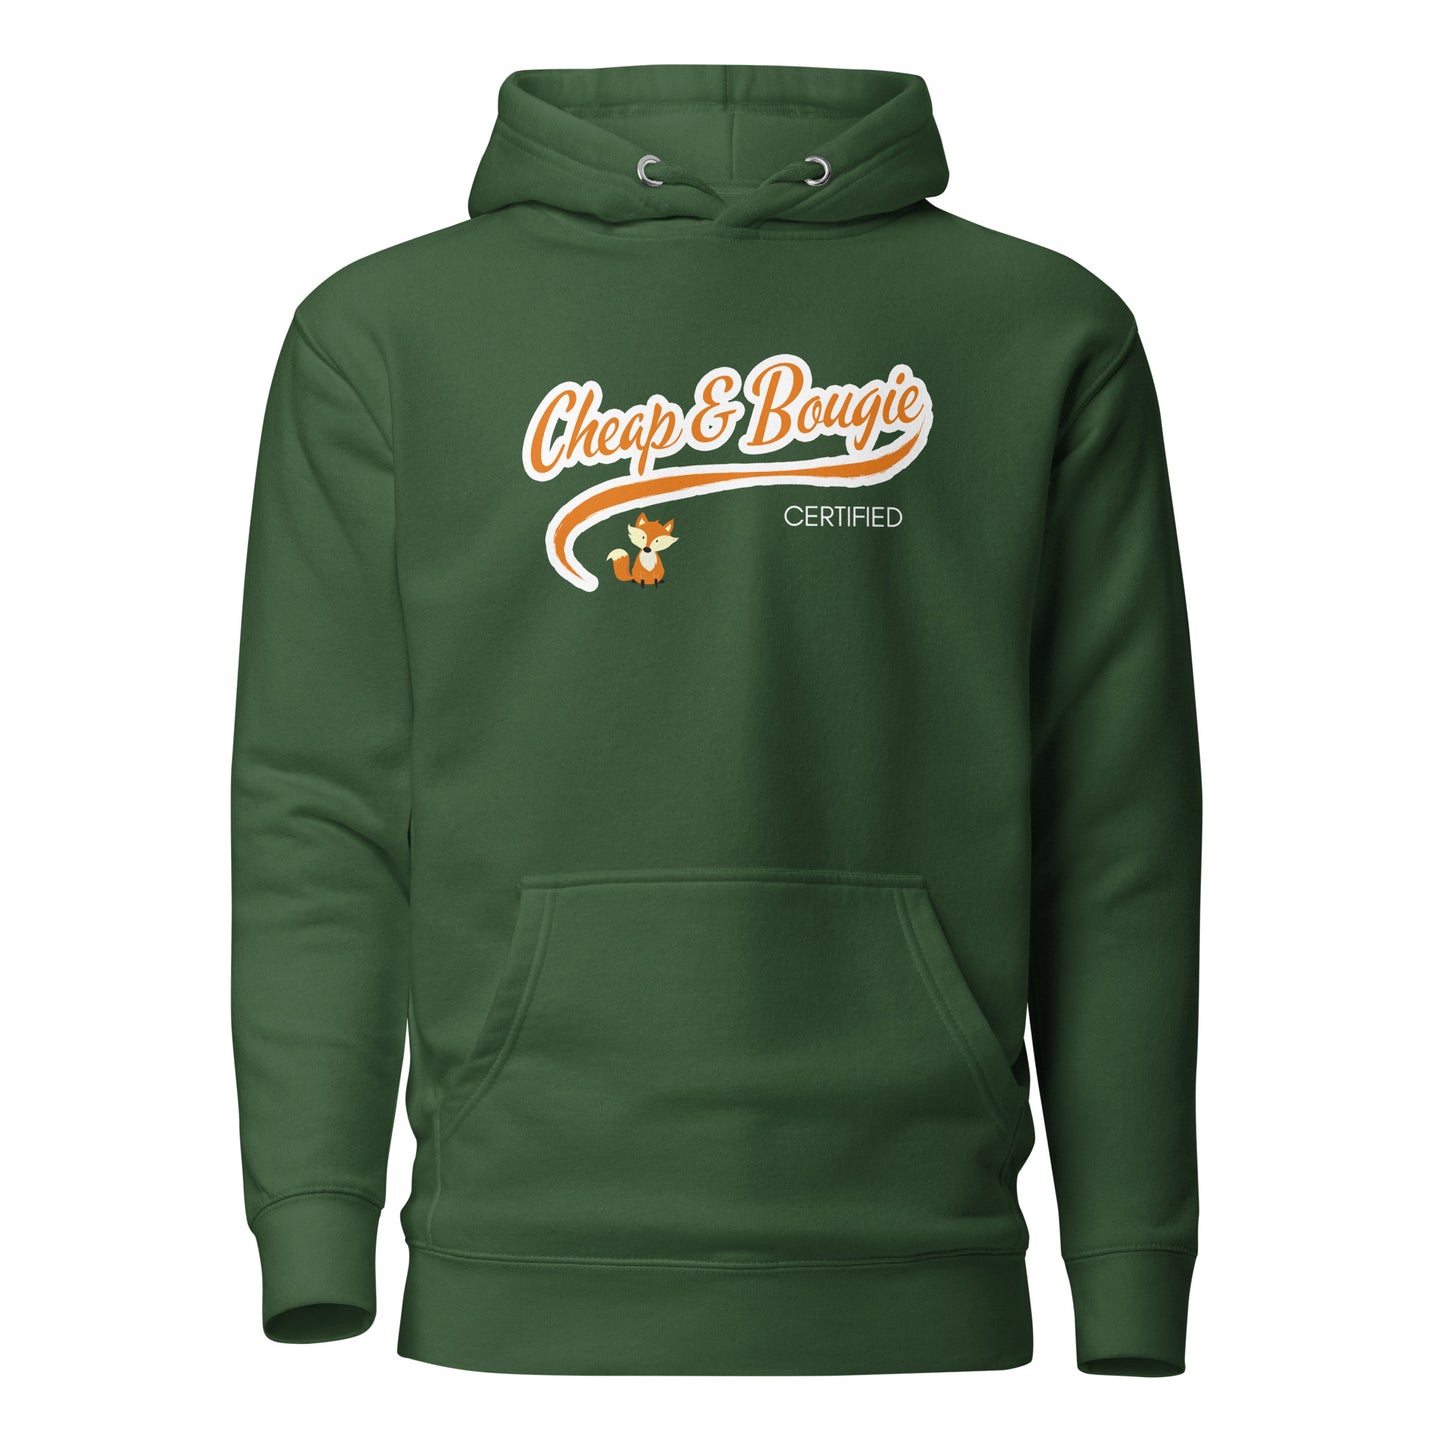 Cheap and Bougie Fox Unisex Hoodie